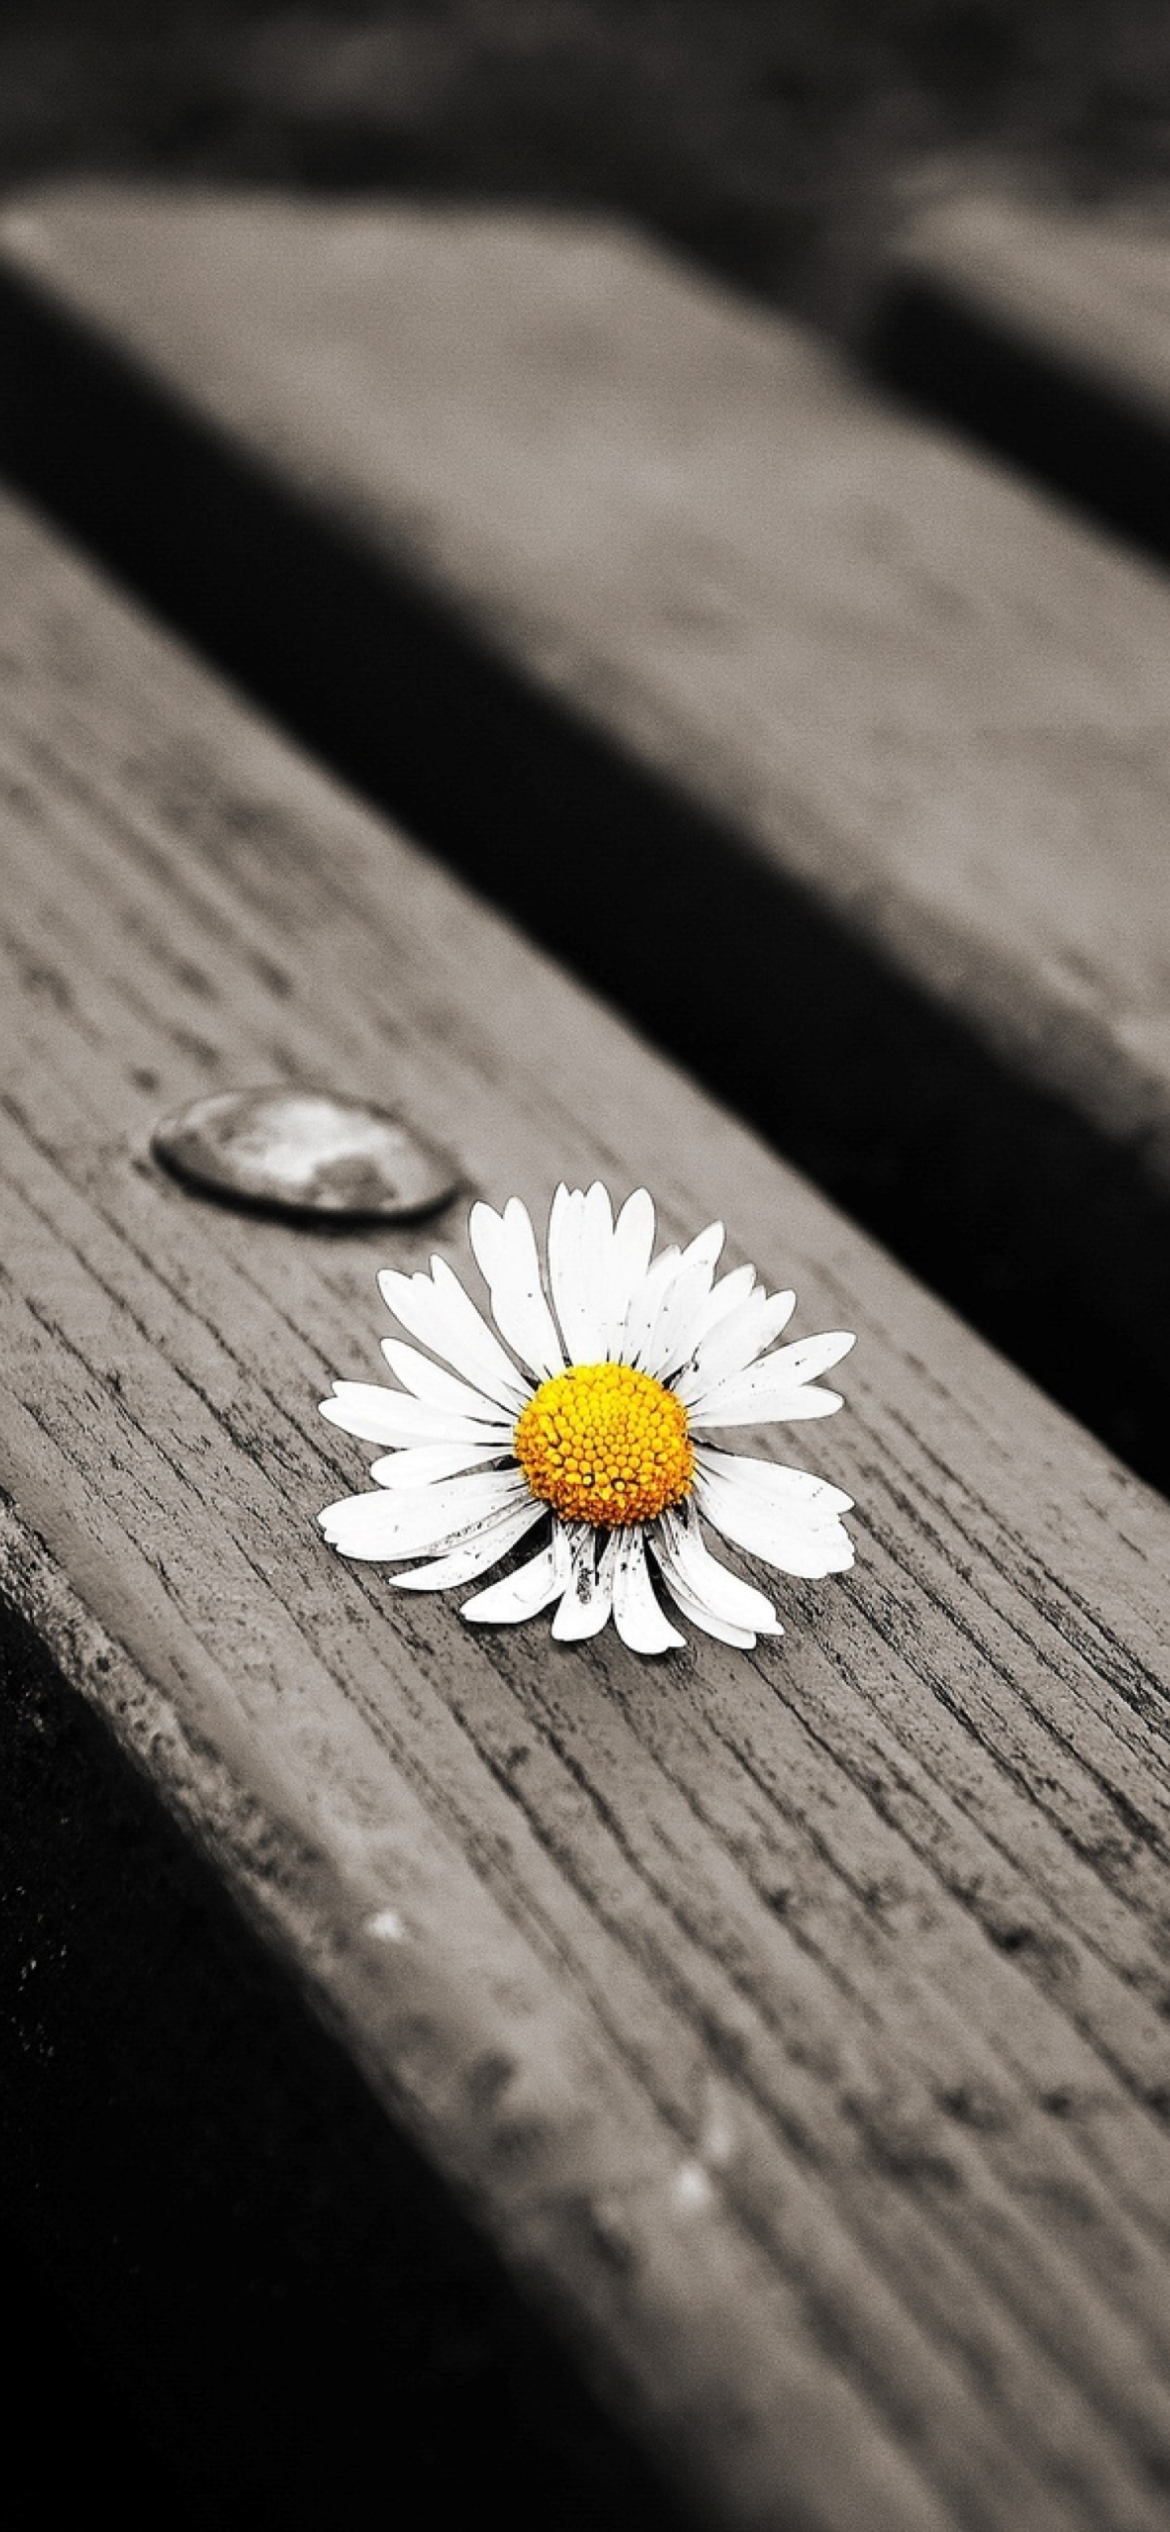 Lonely Daisy On Bench wallpaper 1170x2532